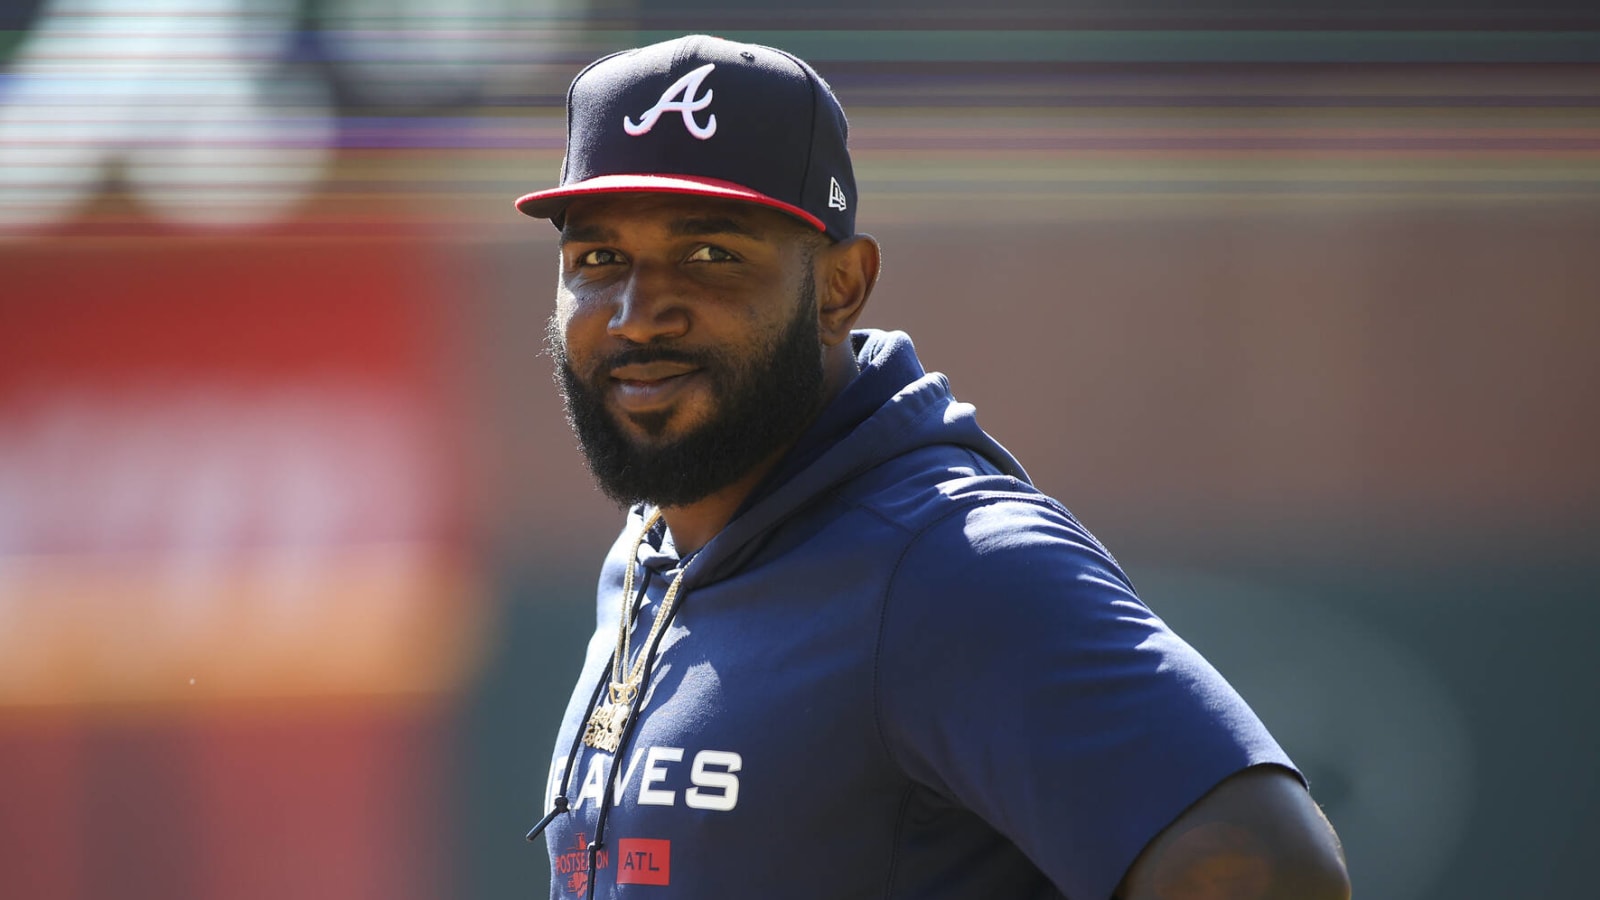 Braves GM Alex Anthopoulos on Marcell Ozuna plan: ‘Meritocracy’